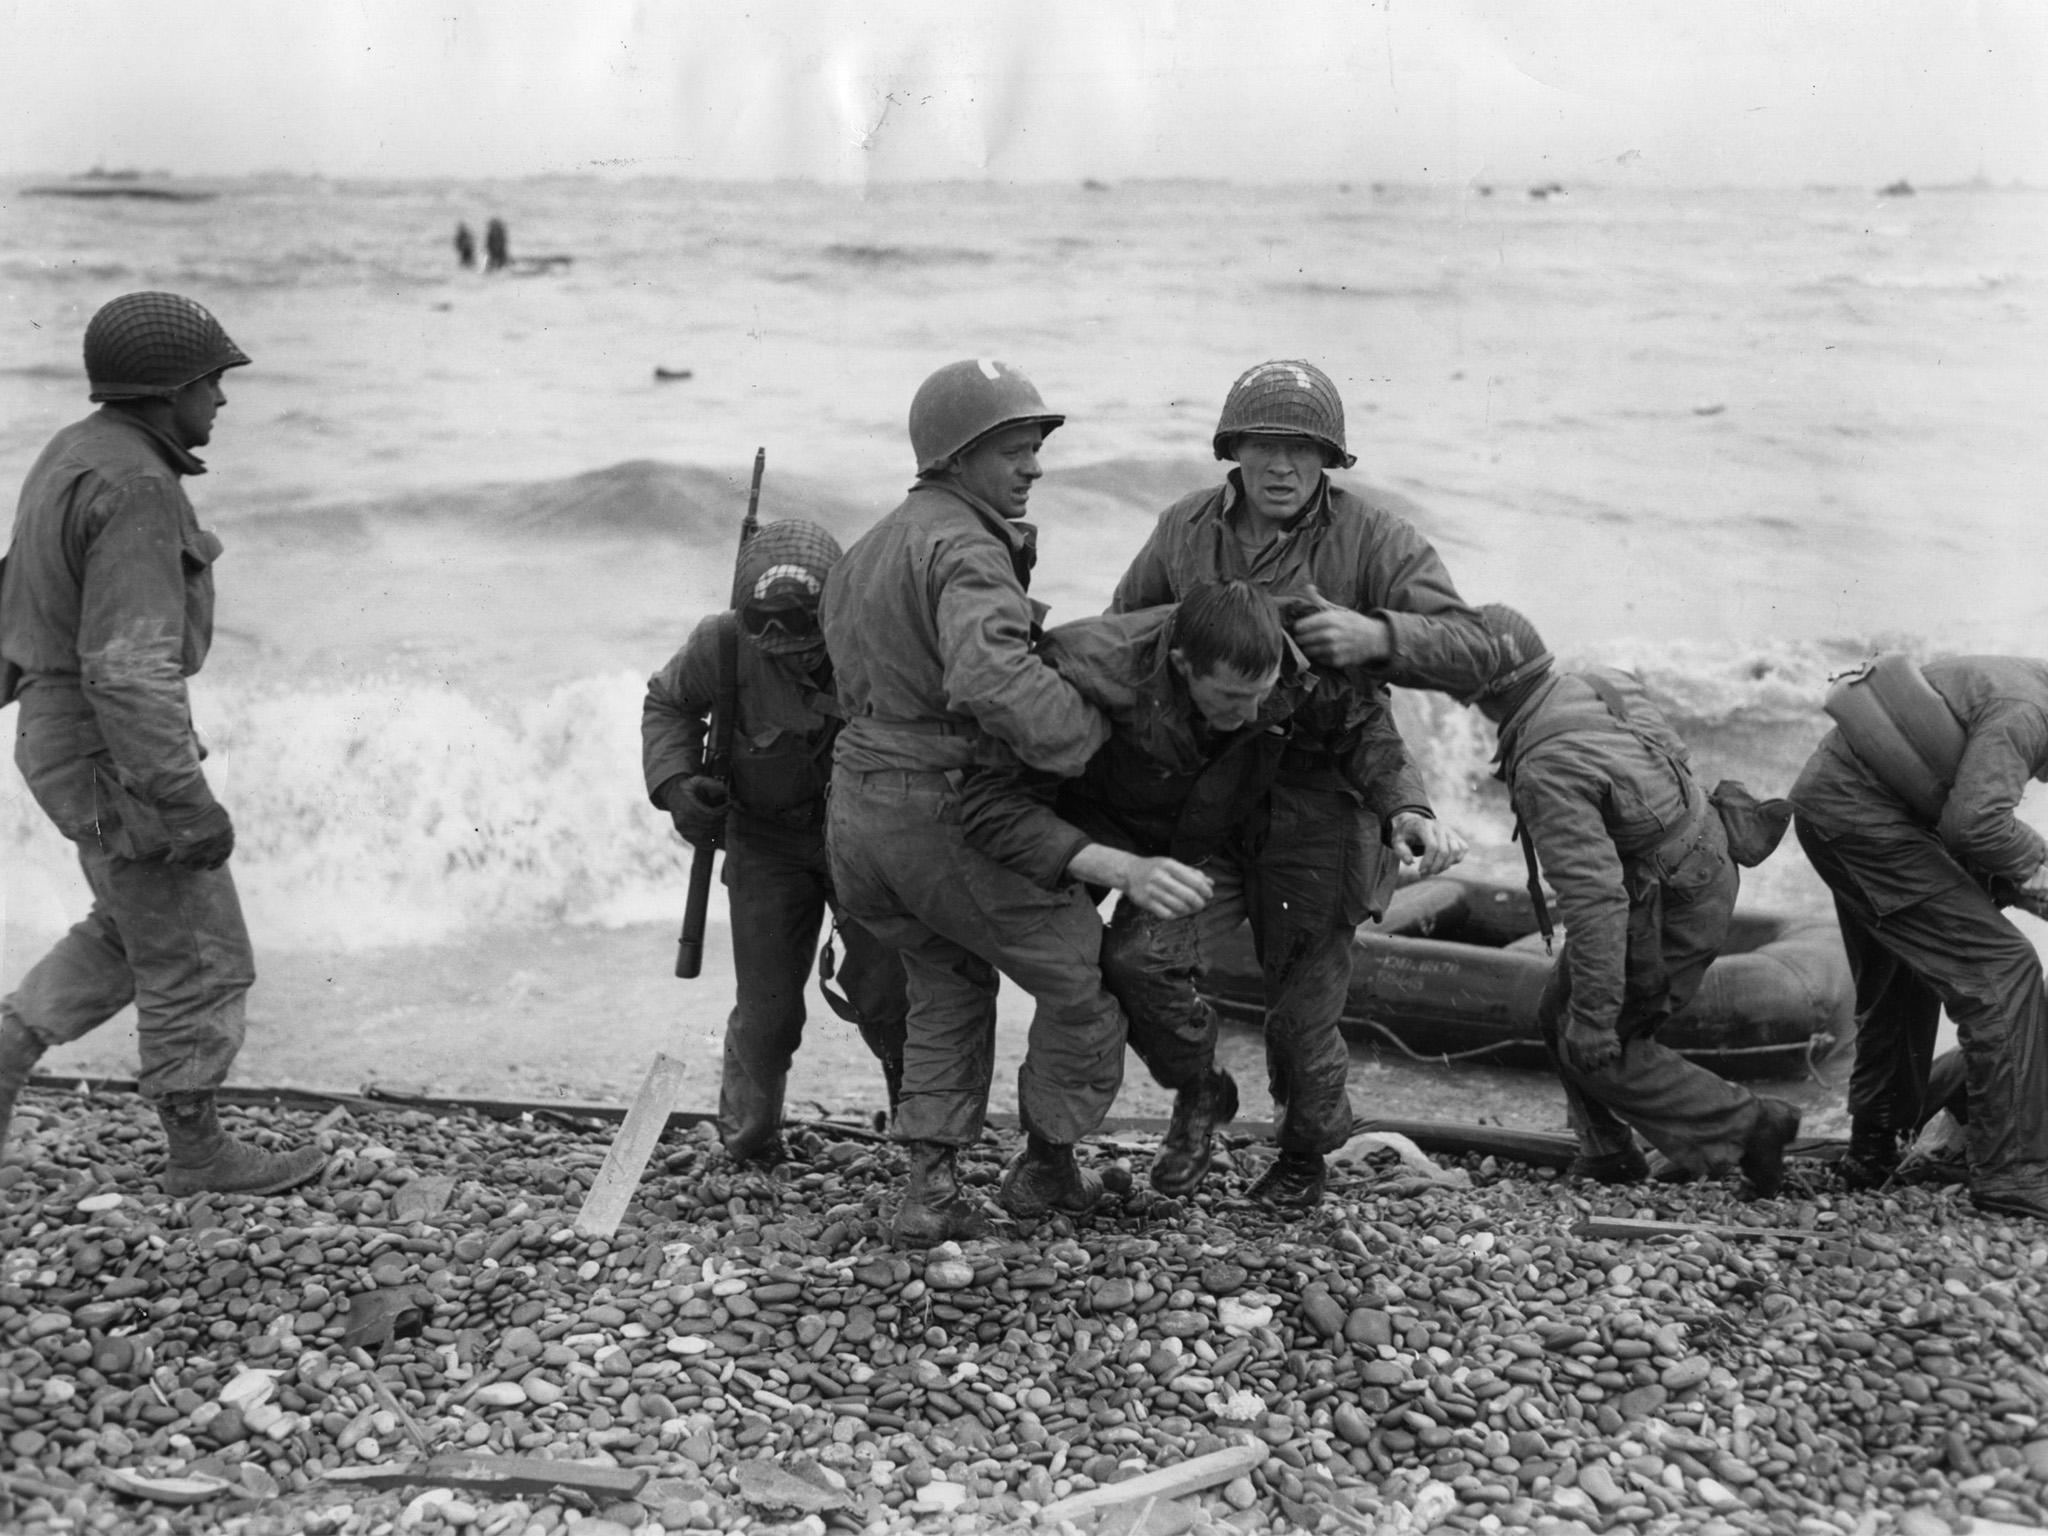 American troops helping injured friends after their dinghy was hit by enemy fire during the D-Day landings